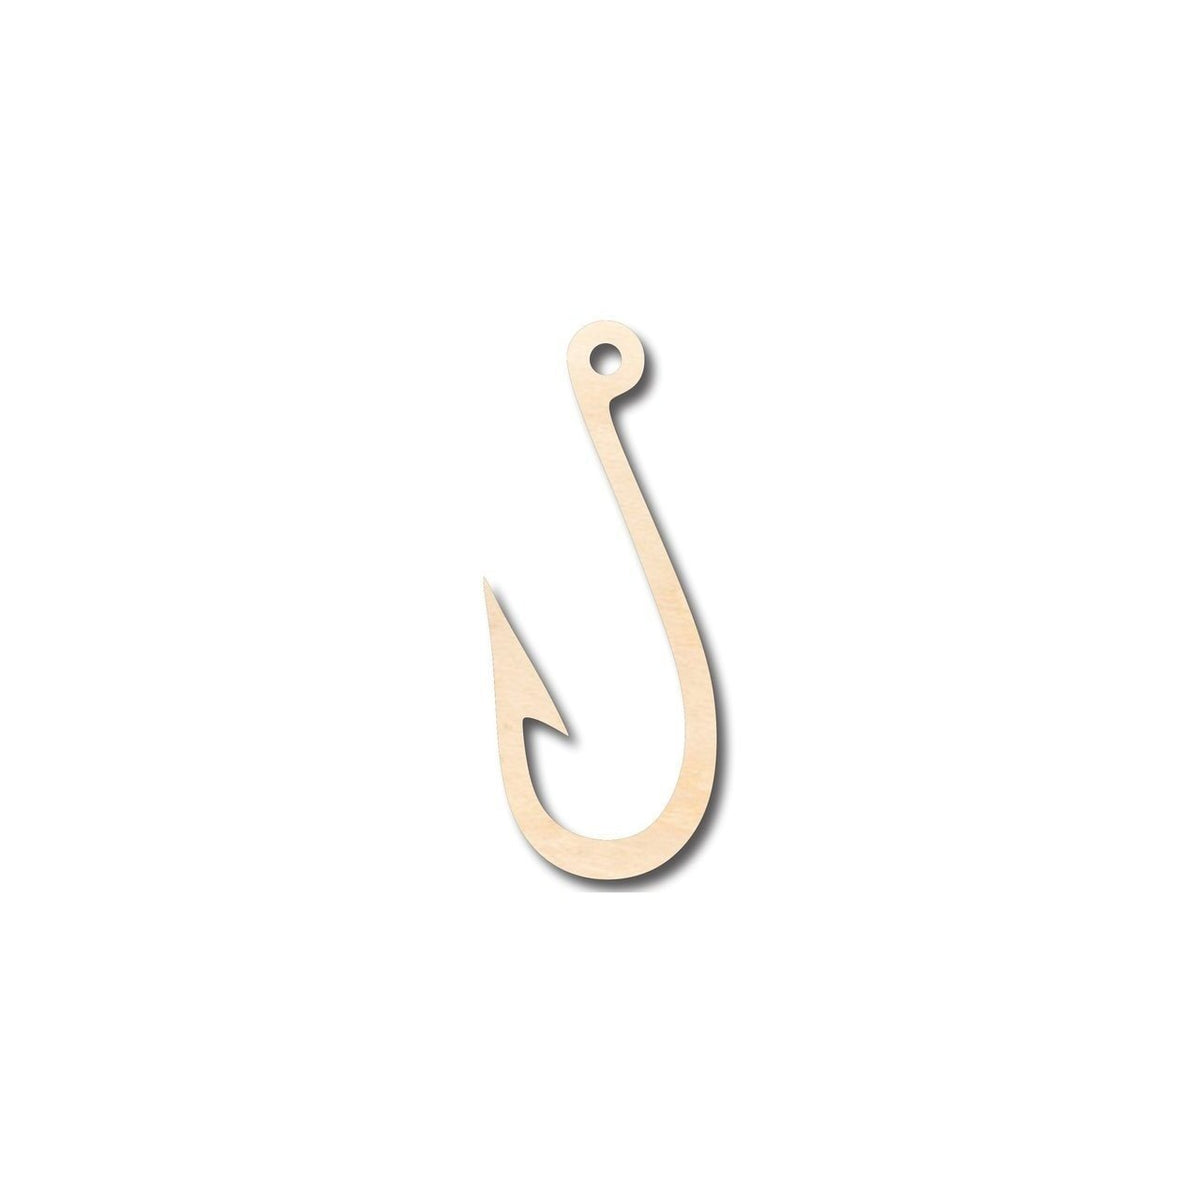 Unfinished Wood Fish Hook Shape - Fishing - Ocean- Craft - up to